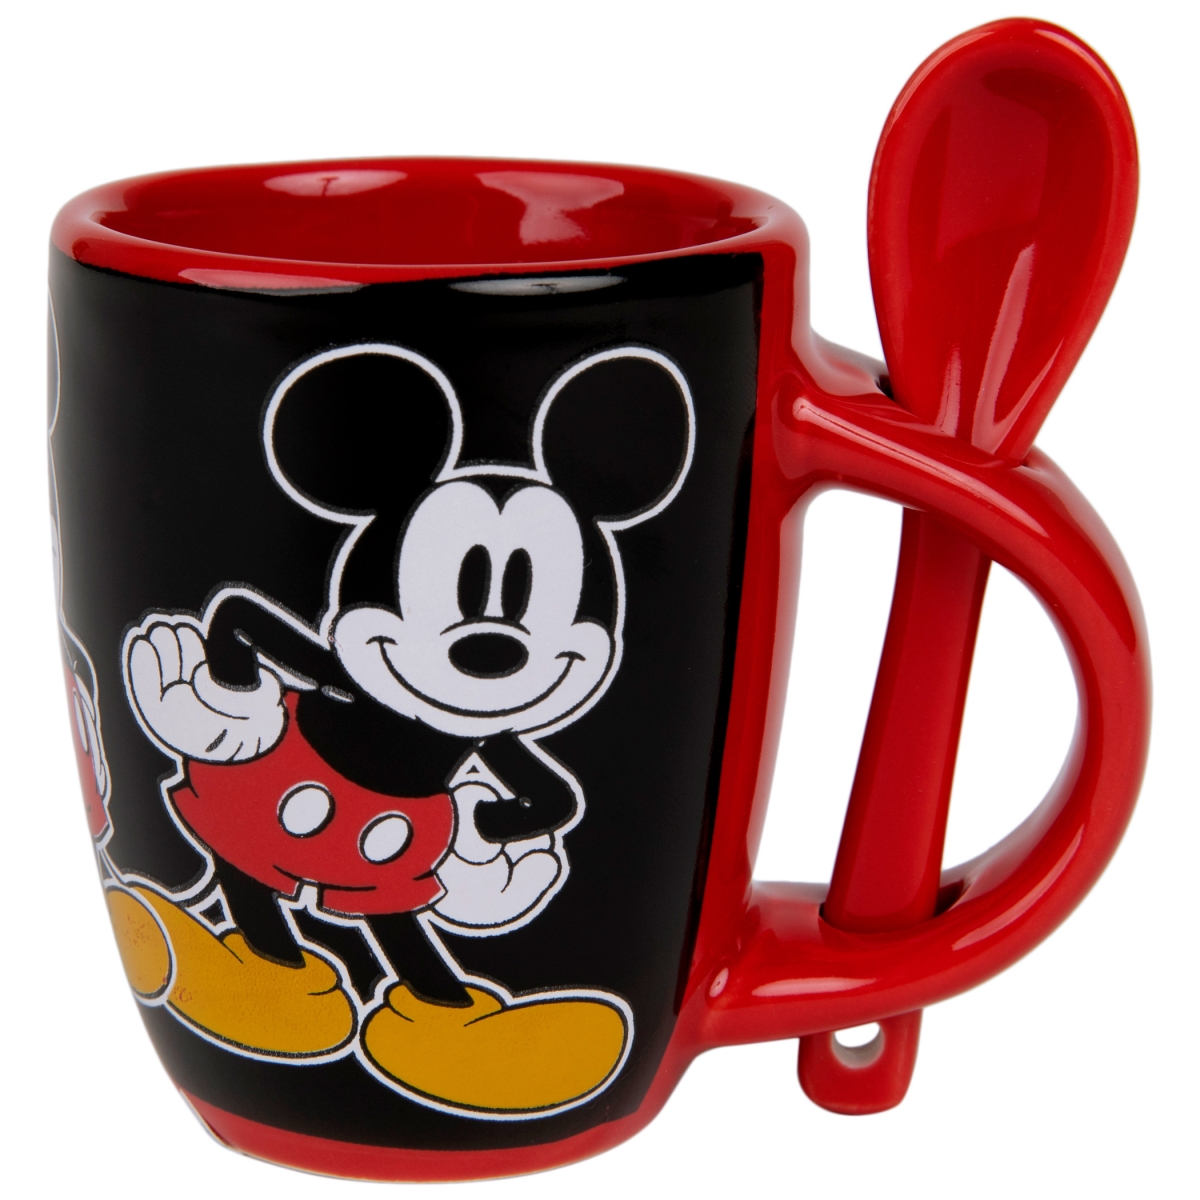 Picture of Mickey Mouse 847129 Disney Mickey Mouse Laughing Ceramic Espresso Mug with Spoon